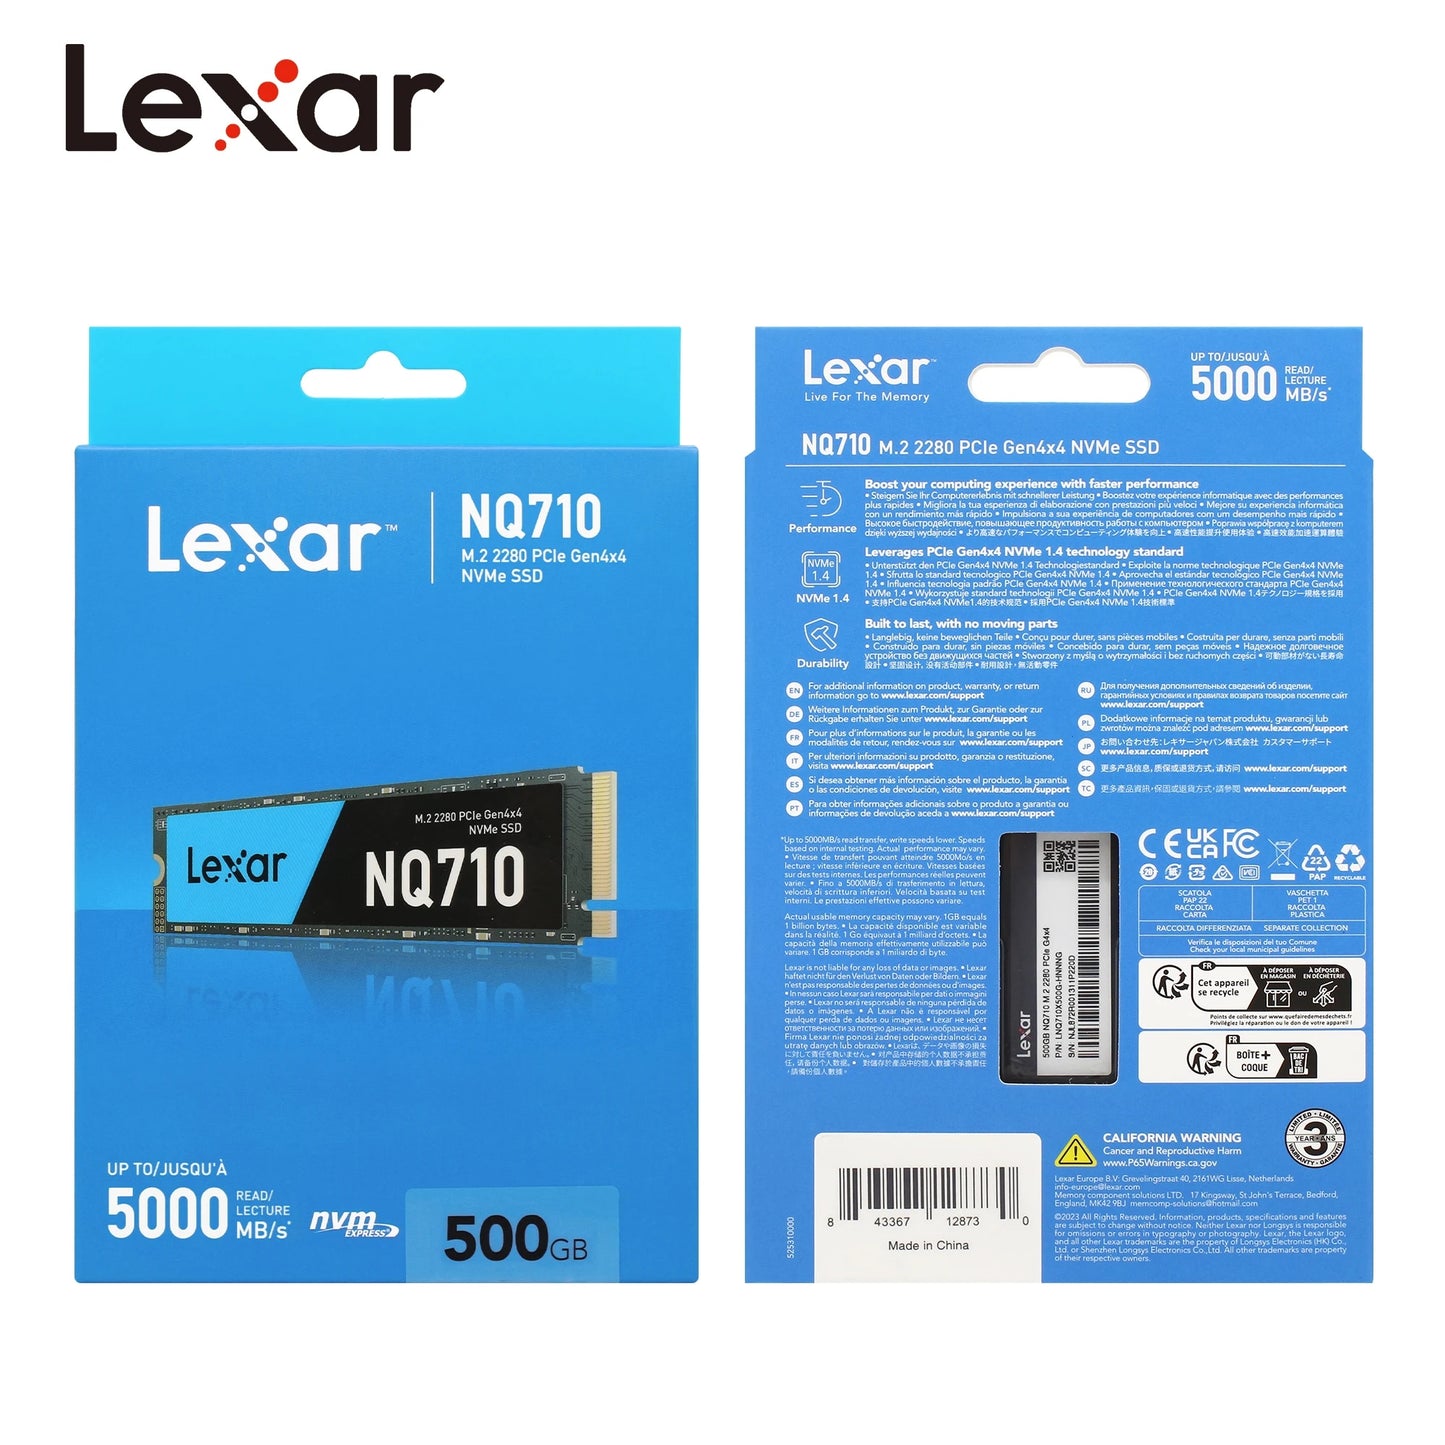 Lexar NQ710 1TB or 2TB SSD, M.2 2280 PCIe Gen4x4 NVMe 1.4, Up to 5000MB/s READ, Up to 3300MB/s WRITE Internal SSD